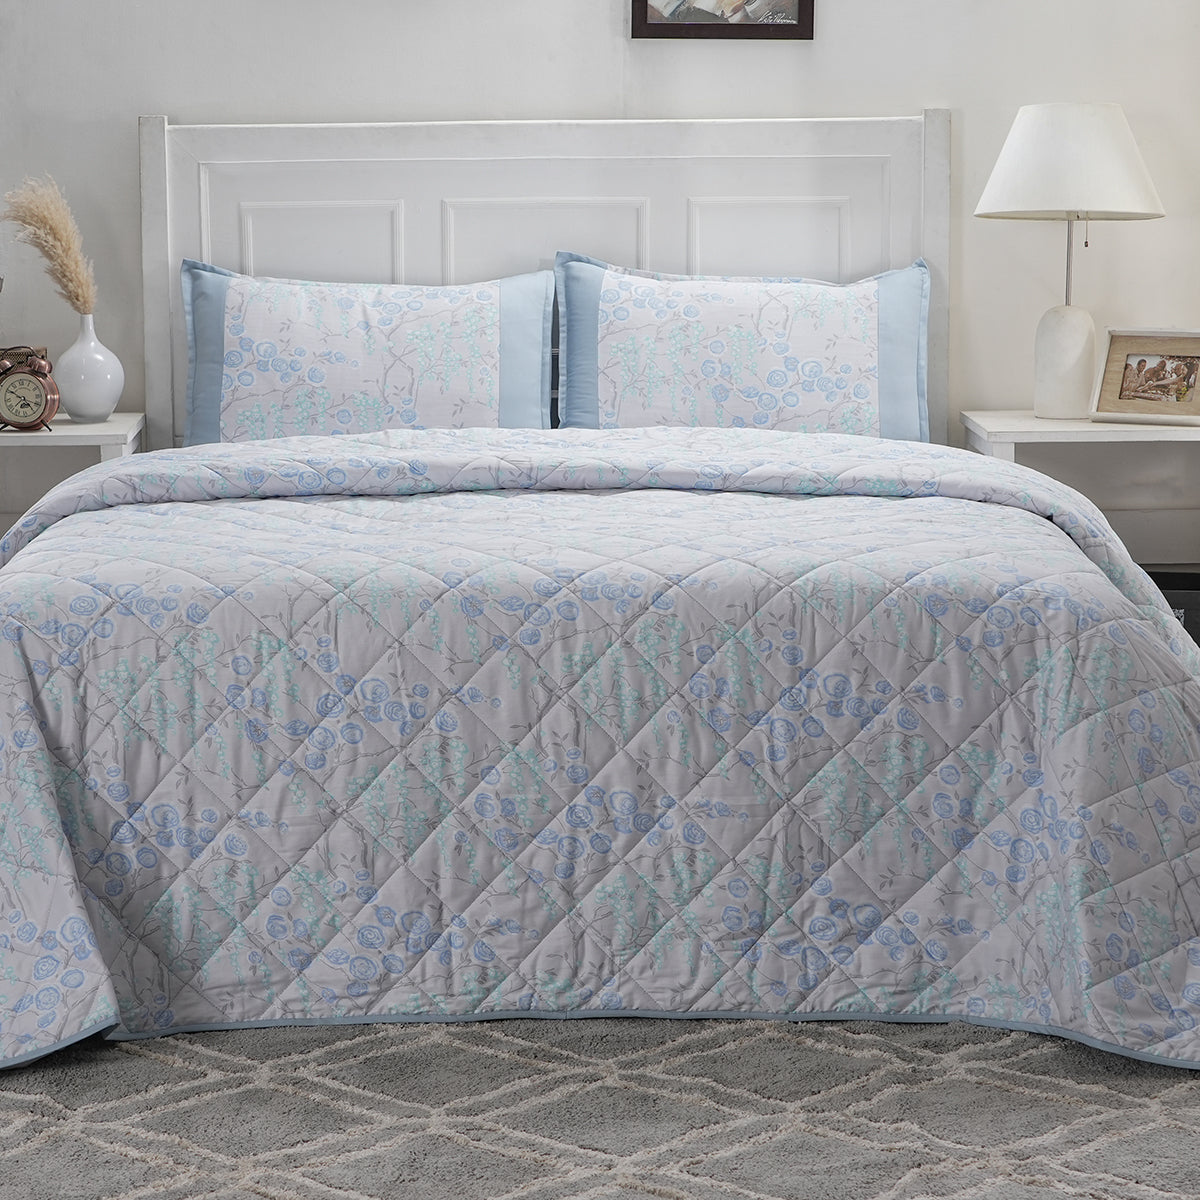 Optimist Bloom Cassia 4PC Quilt/Quilted Bed Cover Set